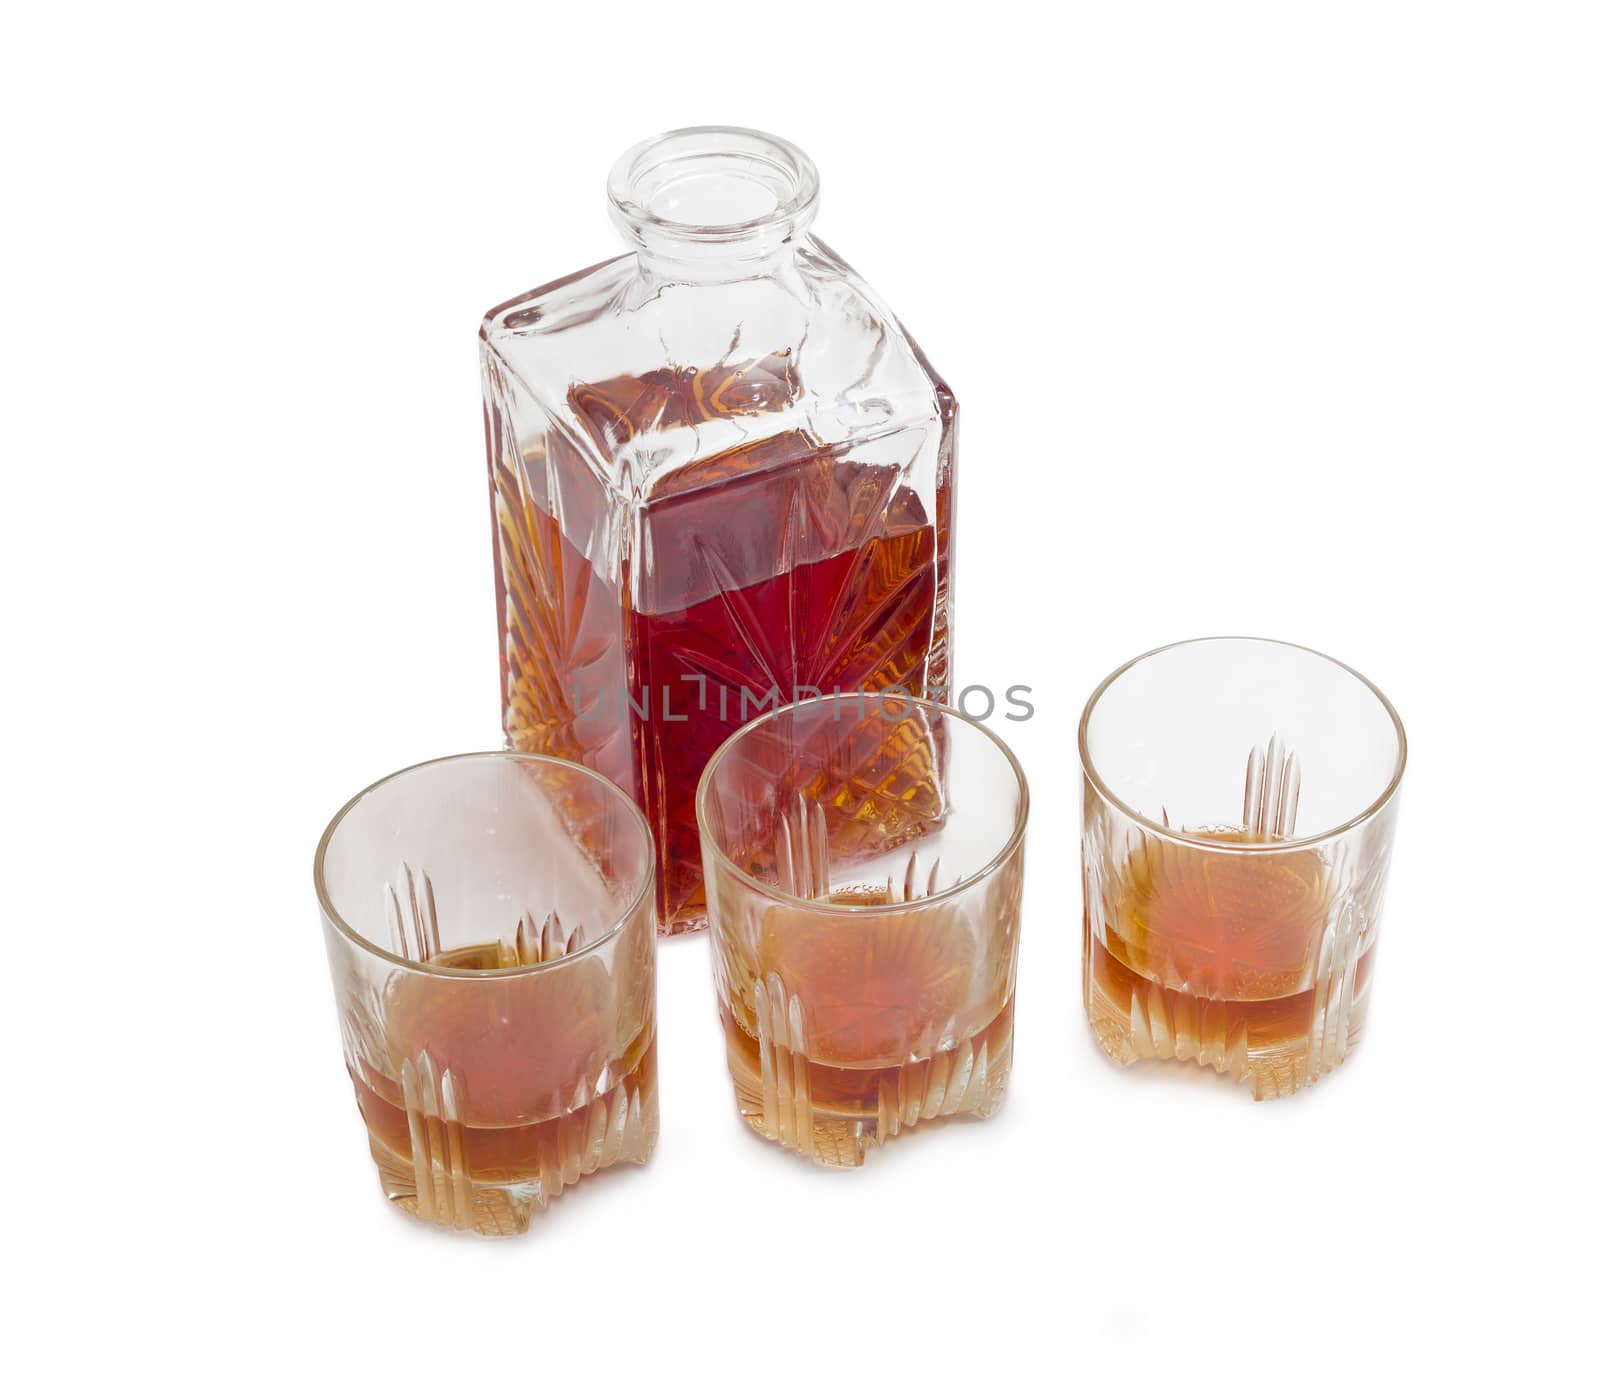 Opened decanter and three glasses with whiskey on a light background
